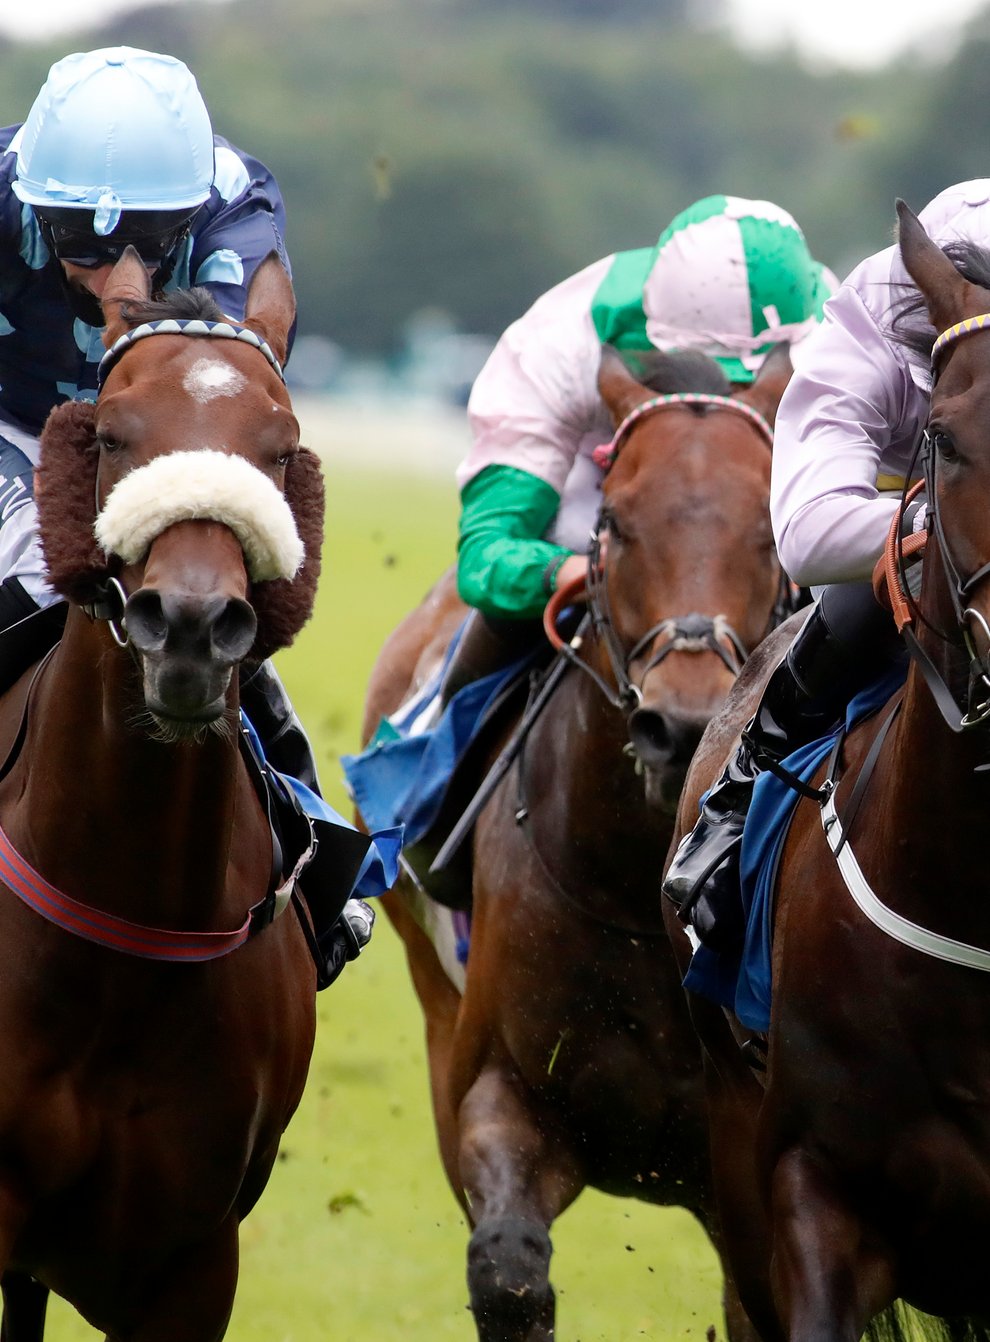 Moss Gill (centre) wins the John Smith’s City Walls Stakes at York